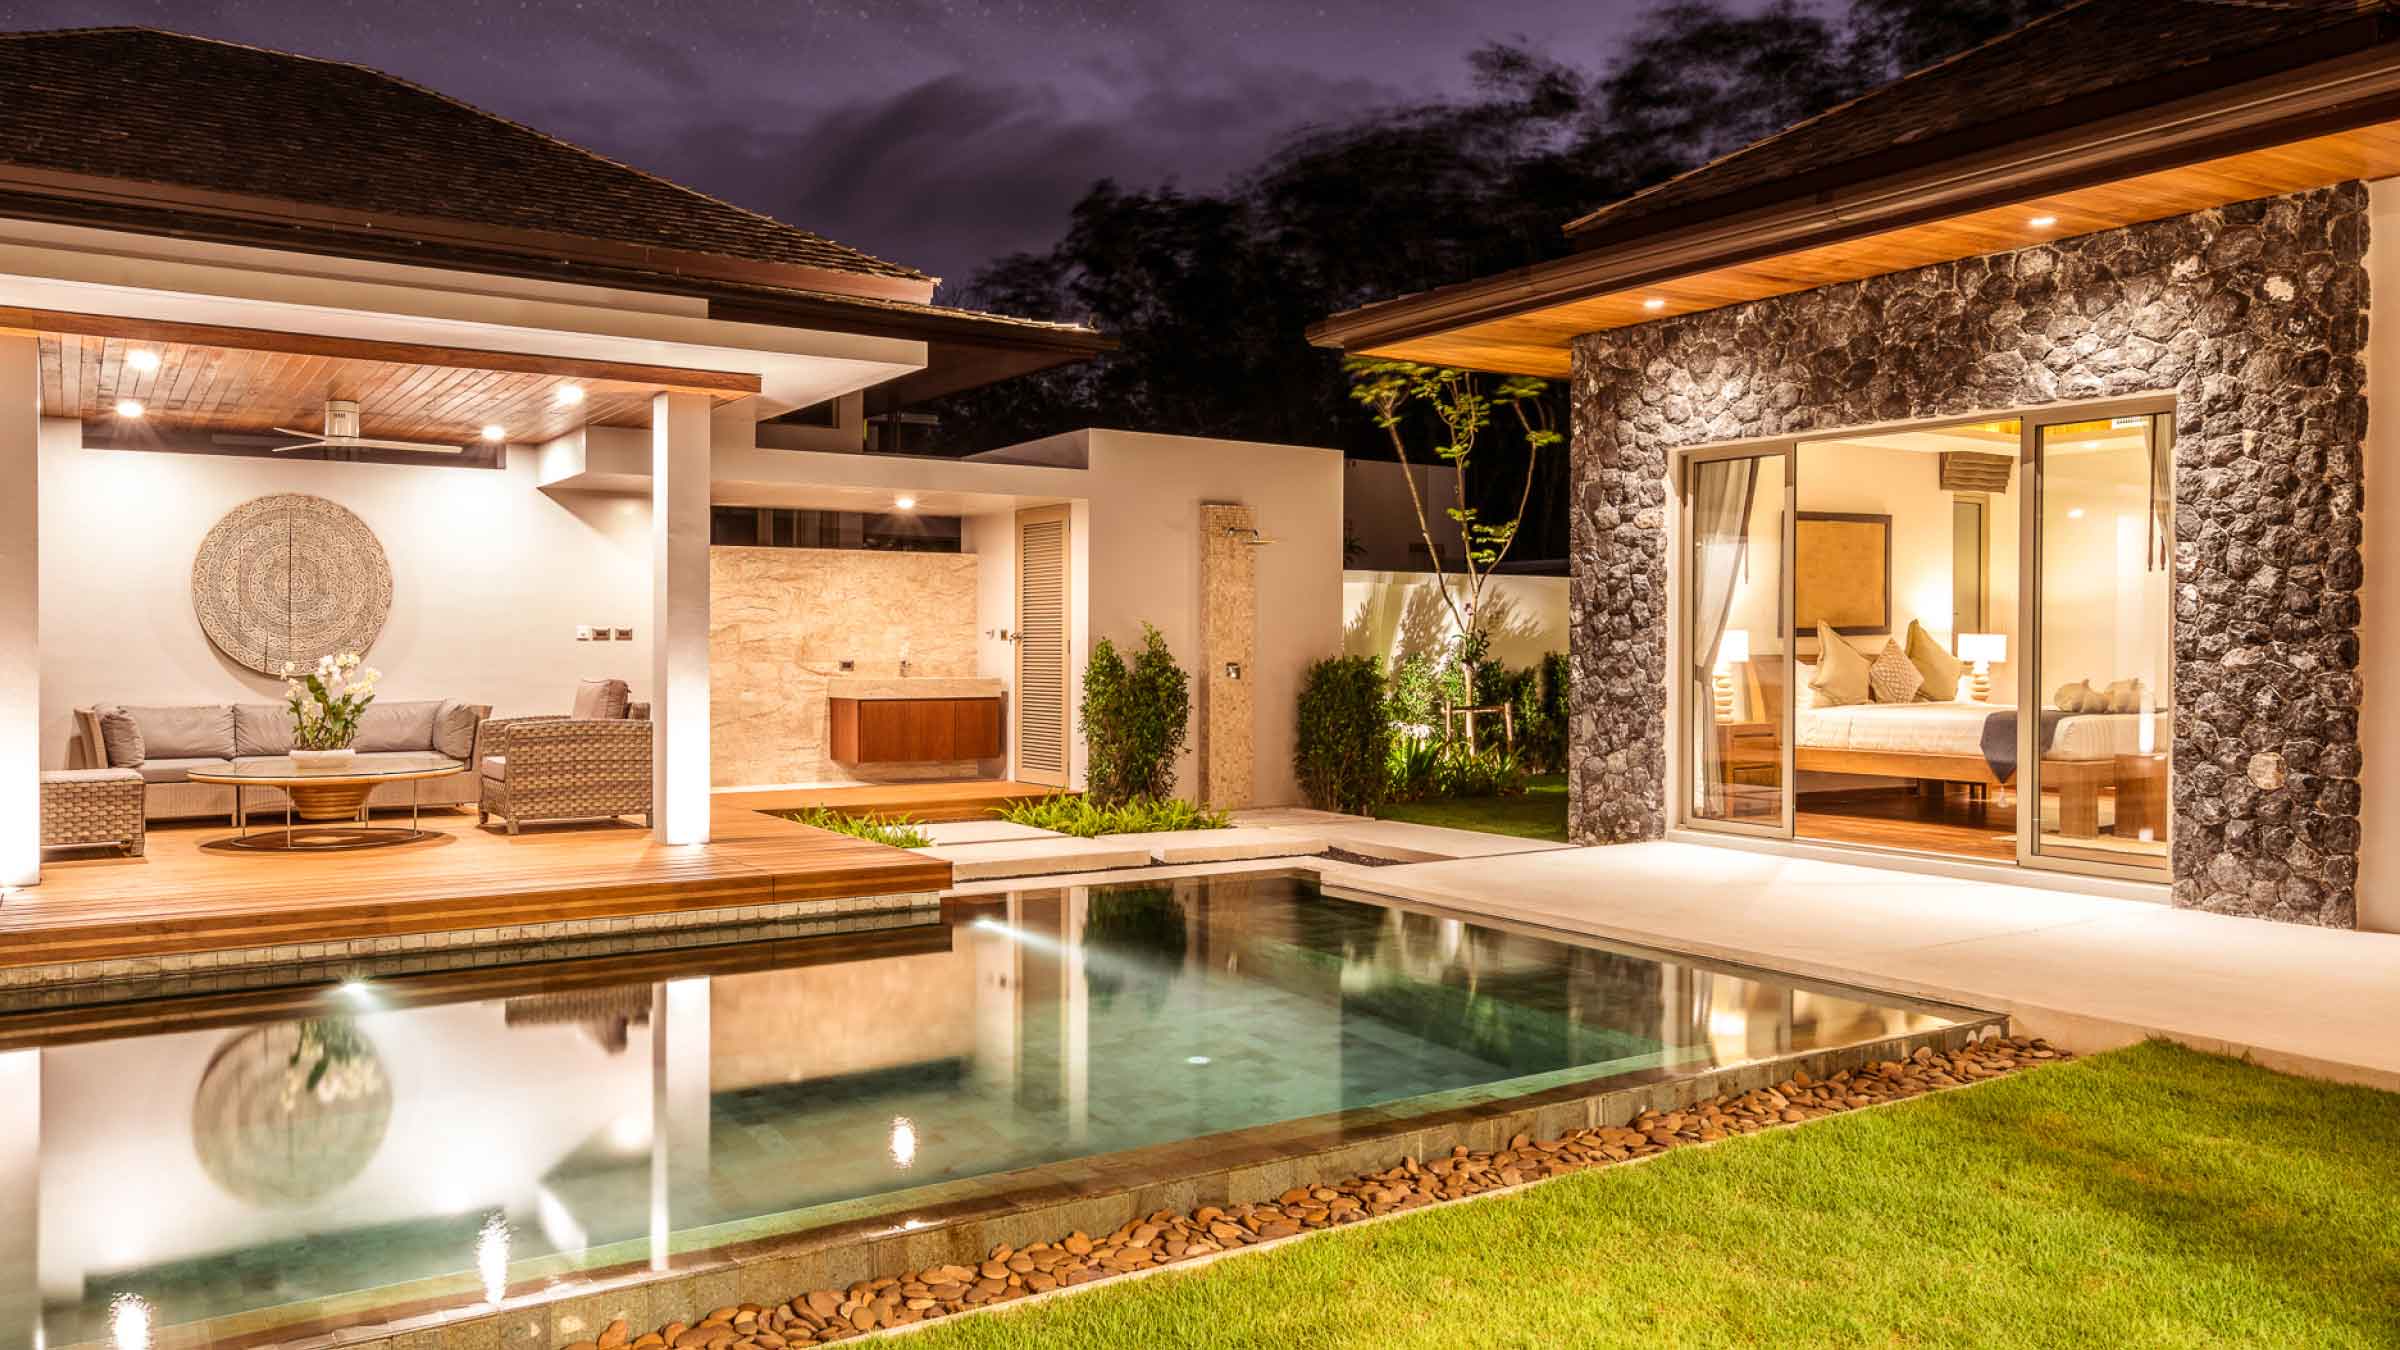 Modern luxury backyard, with a pool and entertainment area. Lit up at night with warm soft lighting.